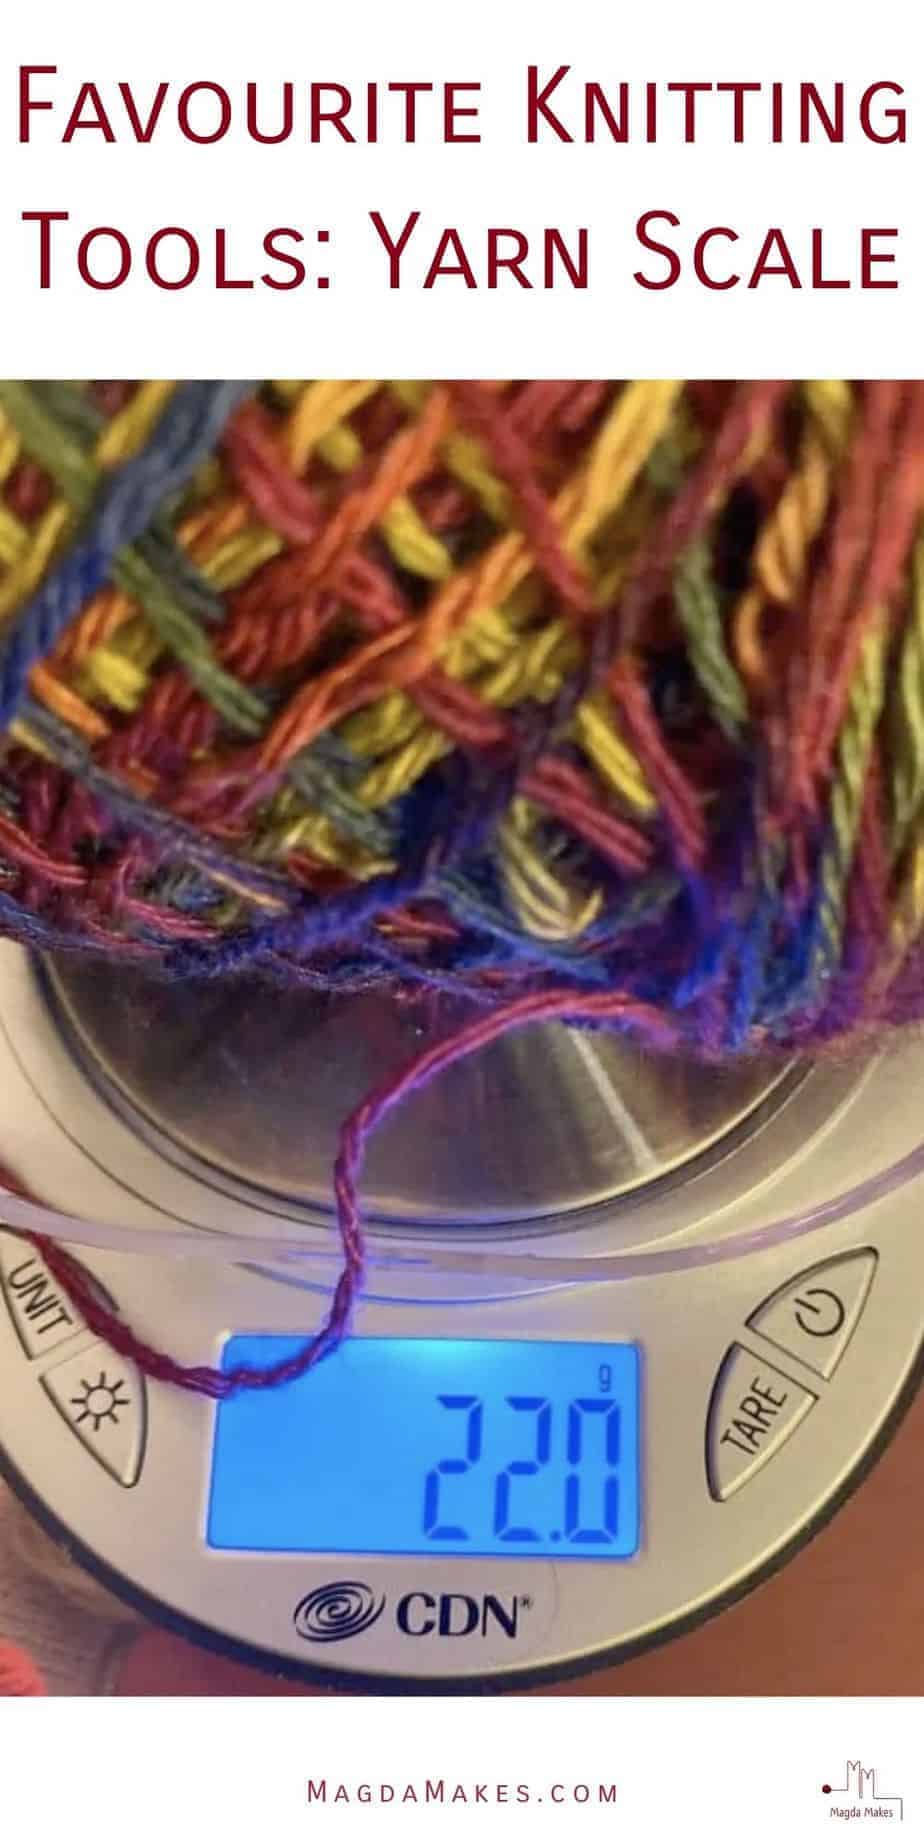 Favourite Knitting Tools: Yarn Scale with yarn: Why you want to weigh your yarn. How to weigh your yarn. How to find the perfect yarn scale. Plus, why you need coins in your knitting kit.